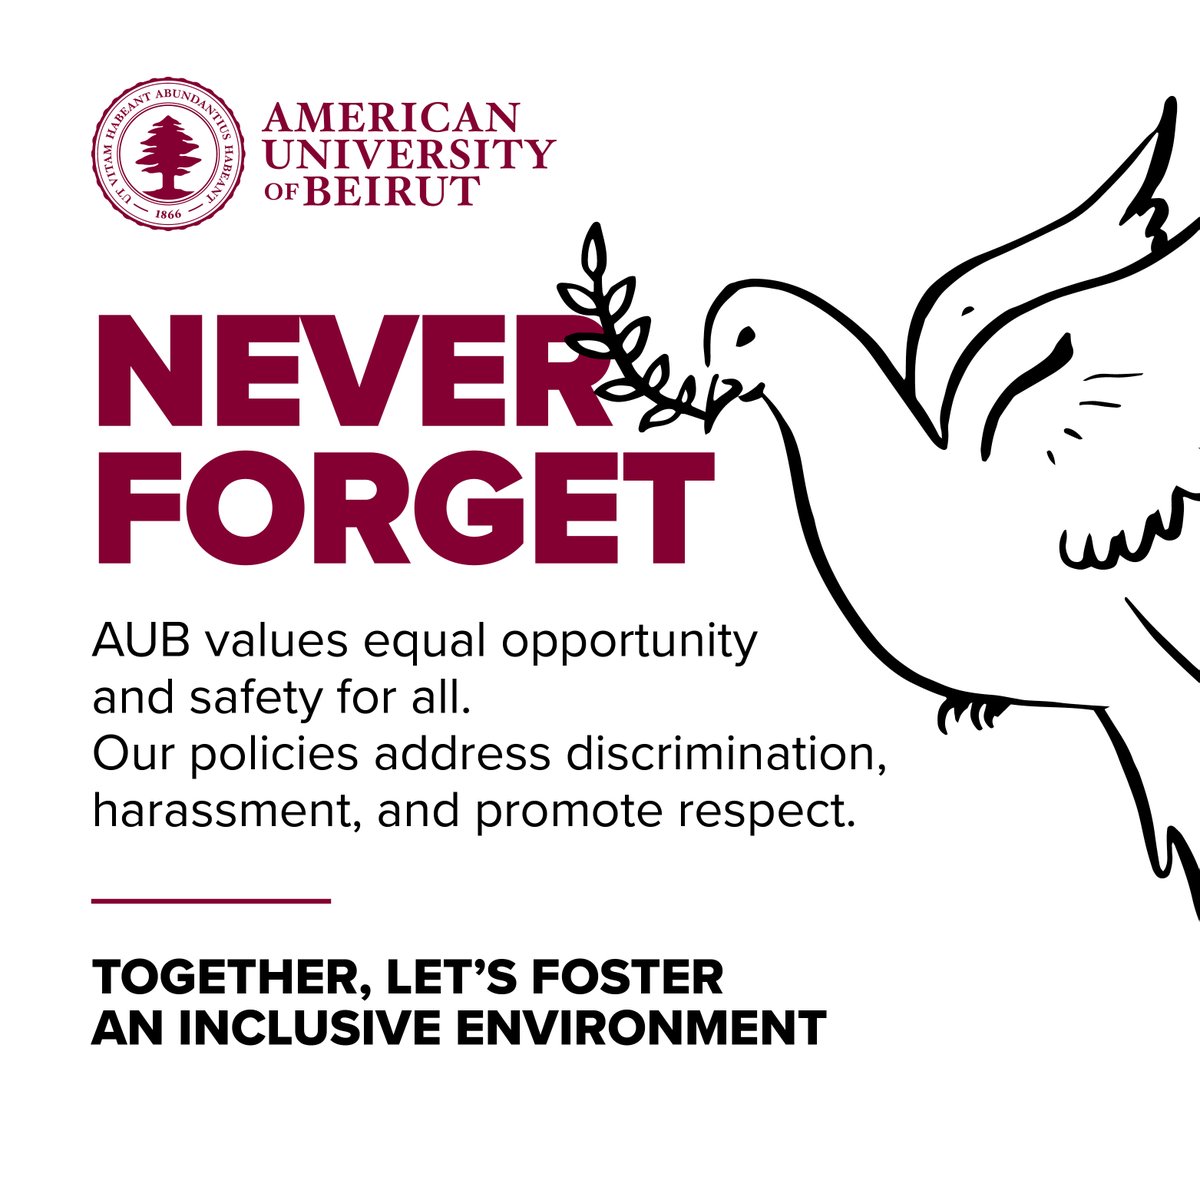 On International Day of Living Together in Peace, AUB reaffirms its commitment to equal opportunity, safety, and respect for all. Let's build an inclusive environment together. #AUBproud #AUBvibes #peace #safety #InclusiveCommunity